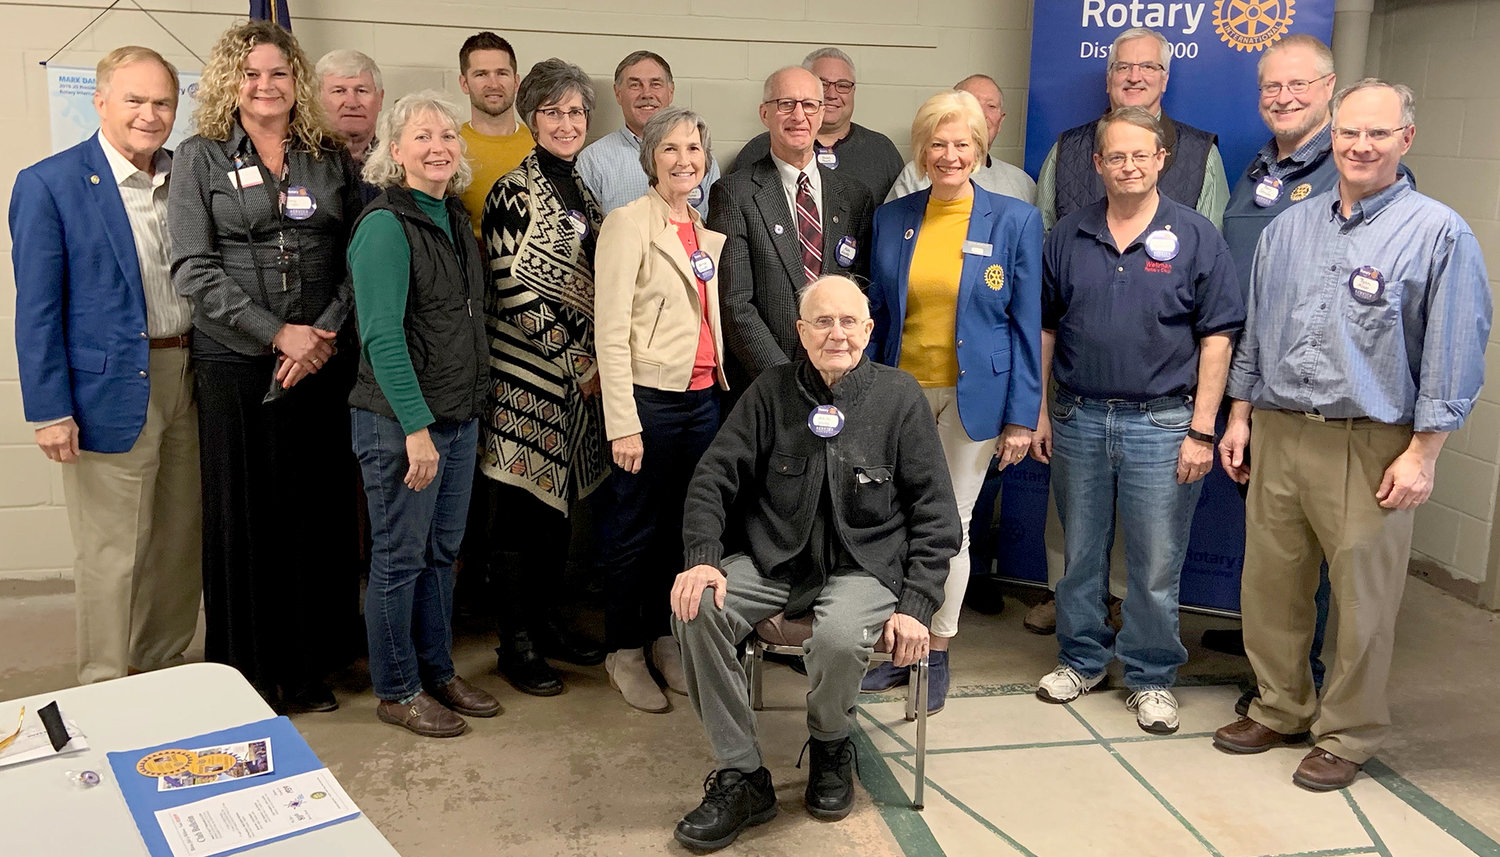 Rotary Club District Governor Erna Morain, at center in photos, visited the Kalona club (top photo) on Oct. 29 and the Wellman Club (bottom photo) on Oct. 30.